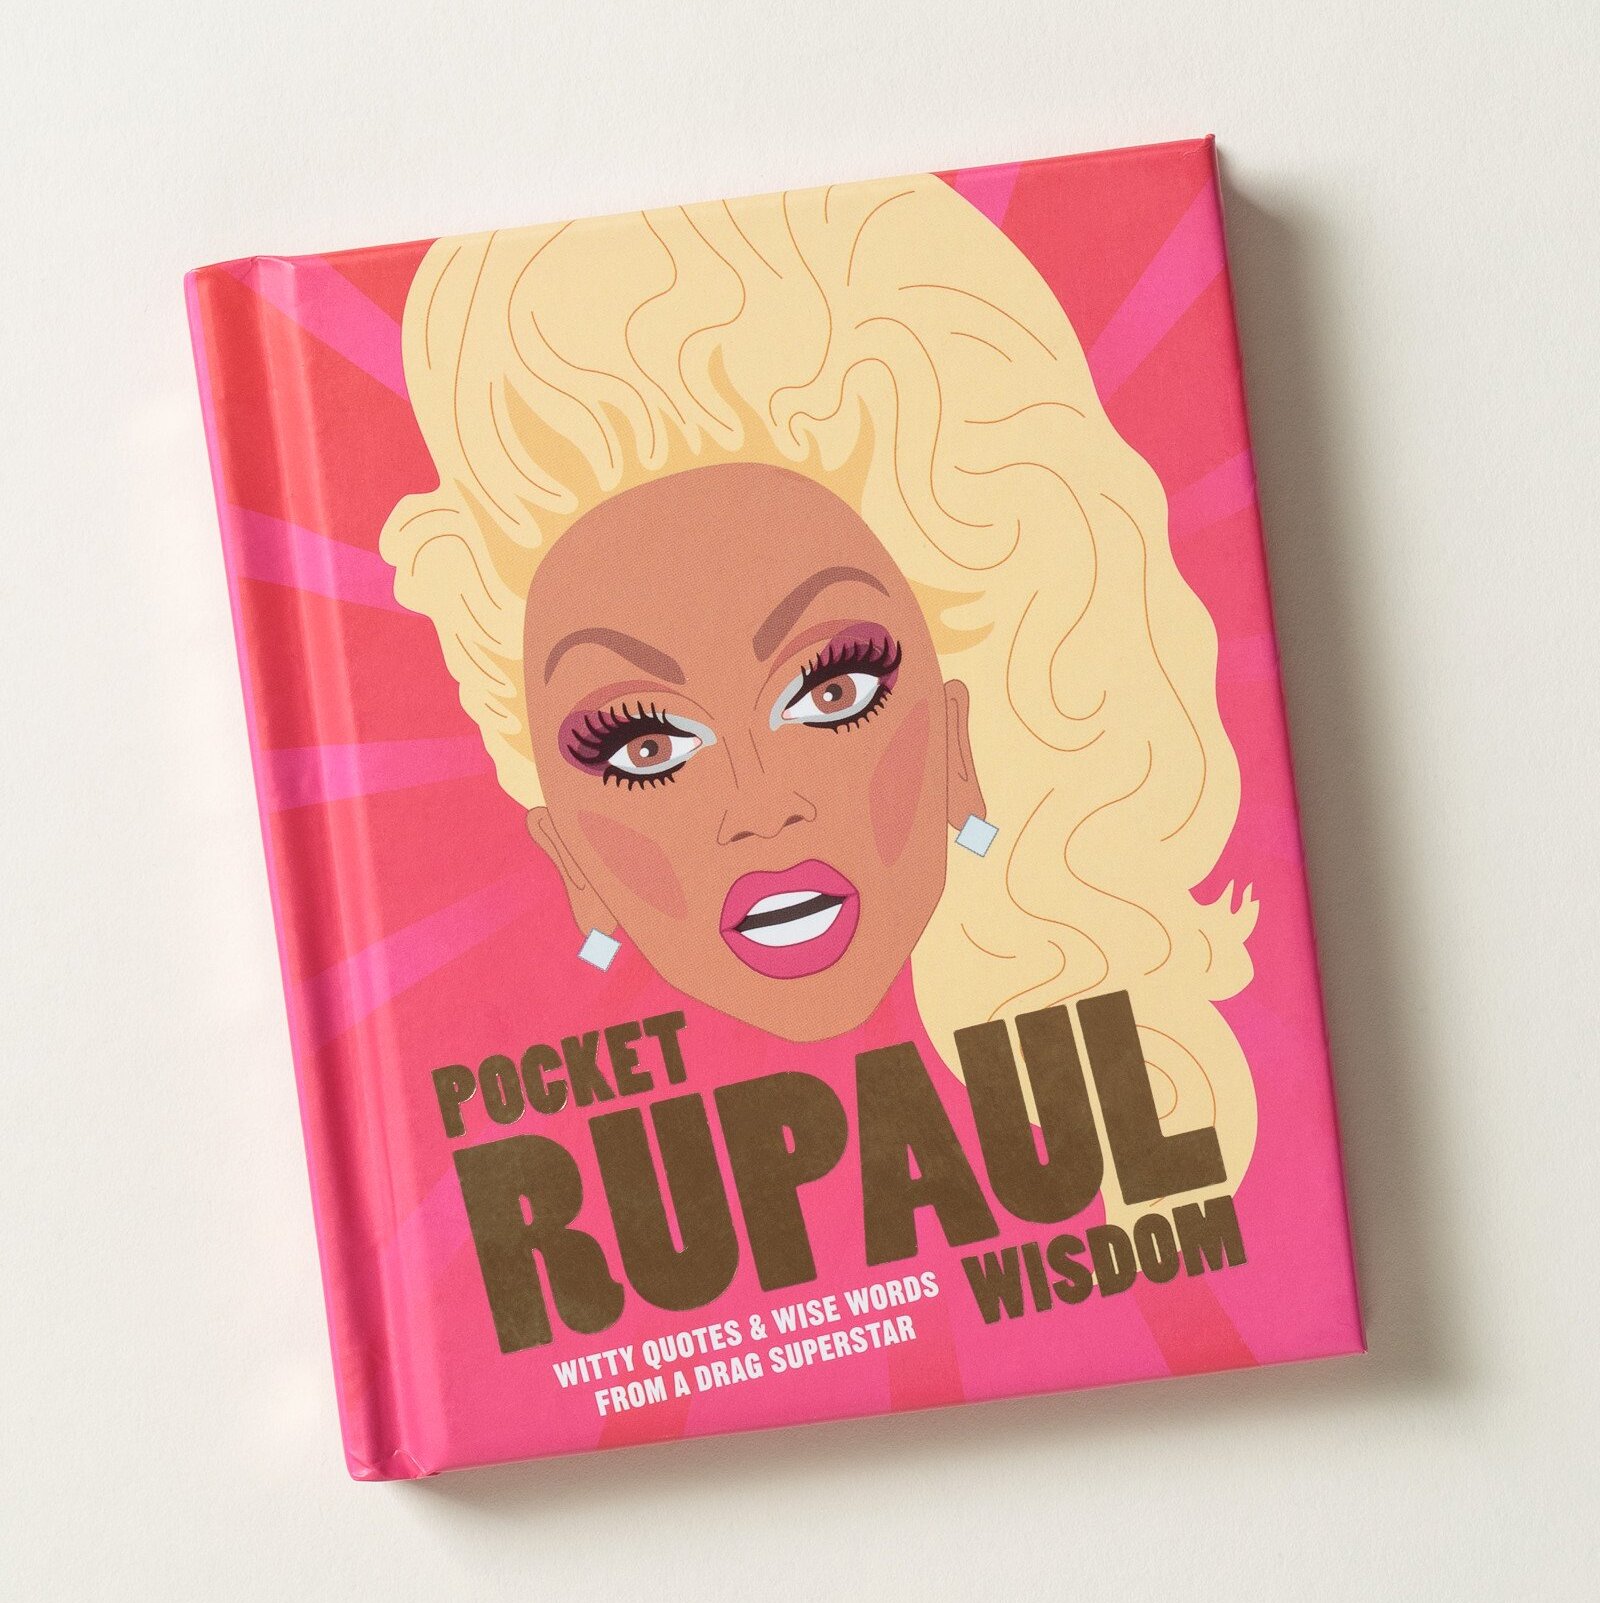 A book of advice and wisom from drag queen RuPaul.